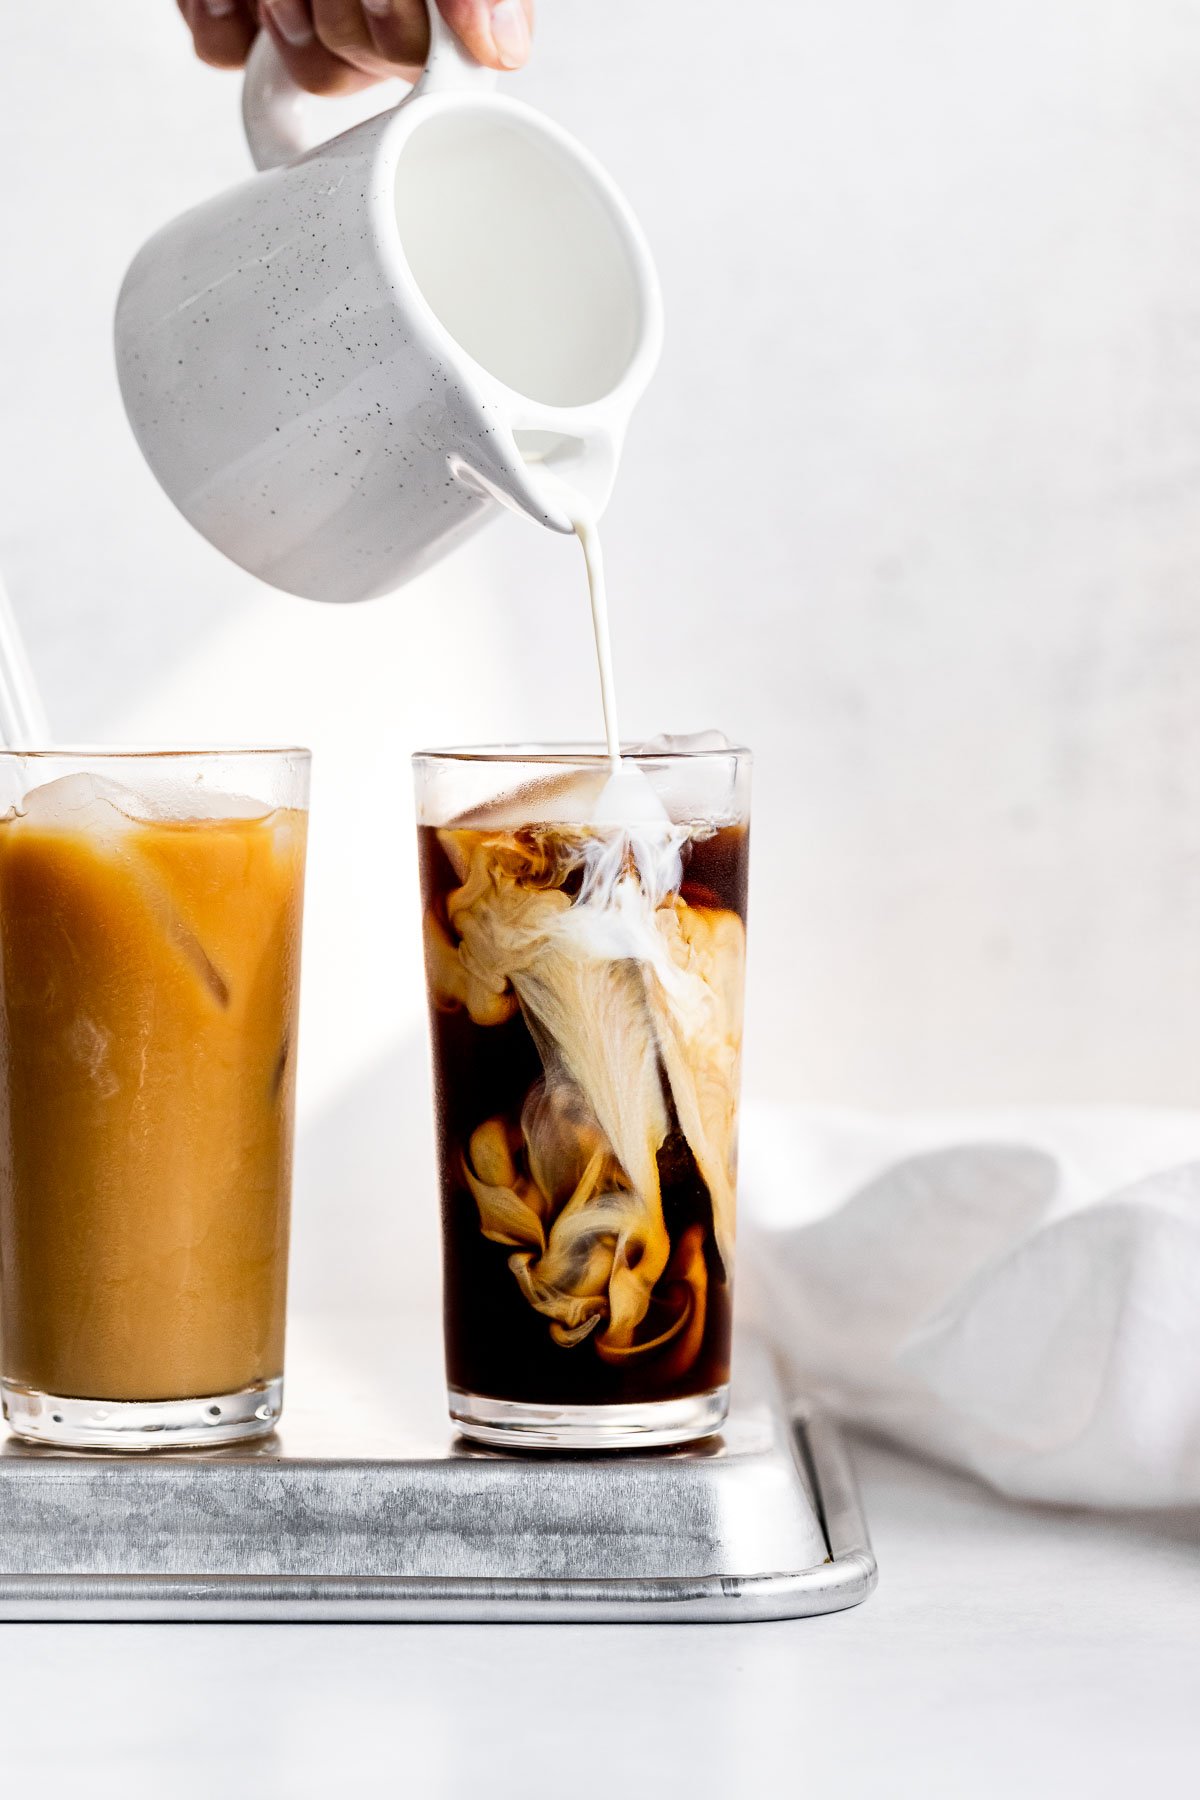 How Can I Make Cold Brew Coffee at Home 